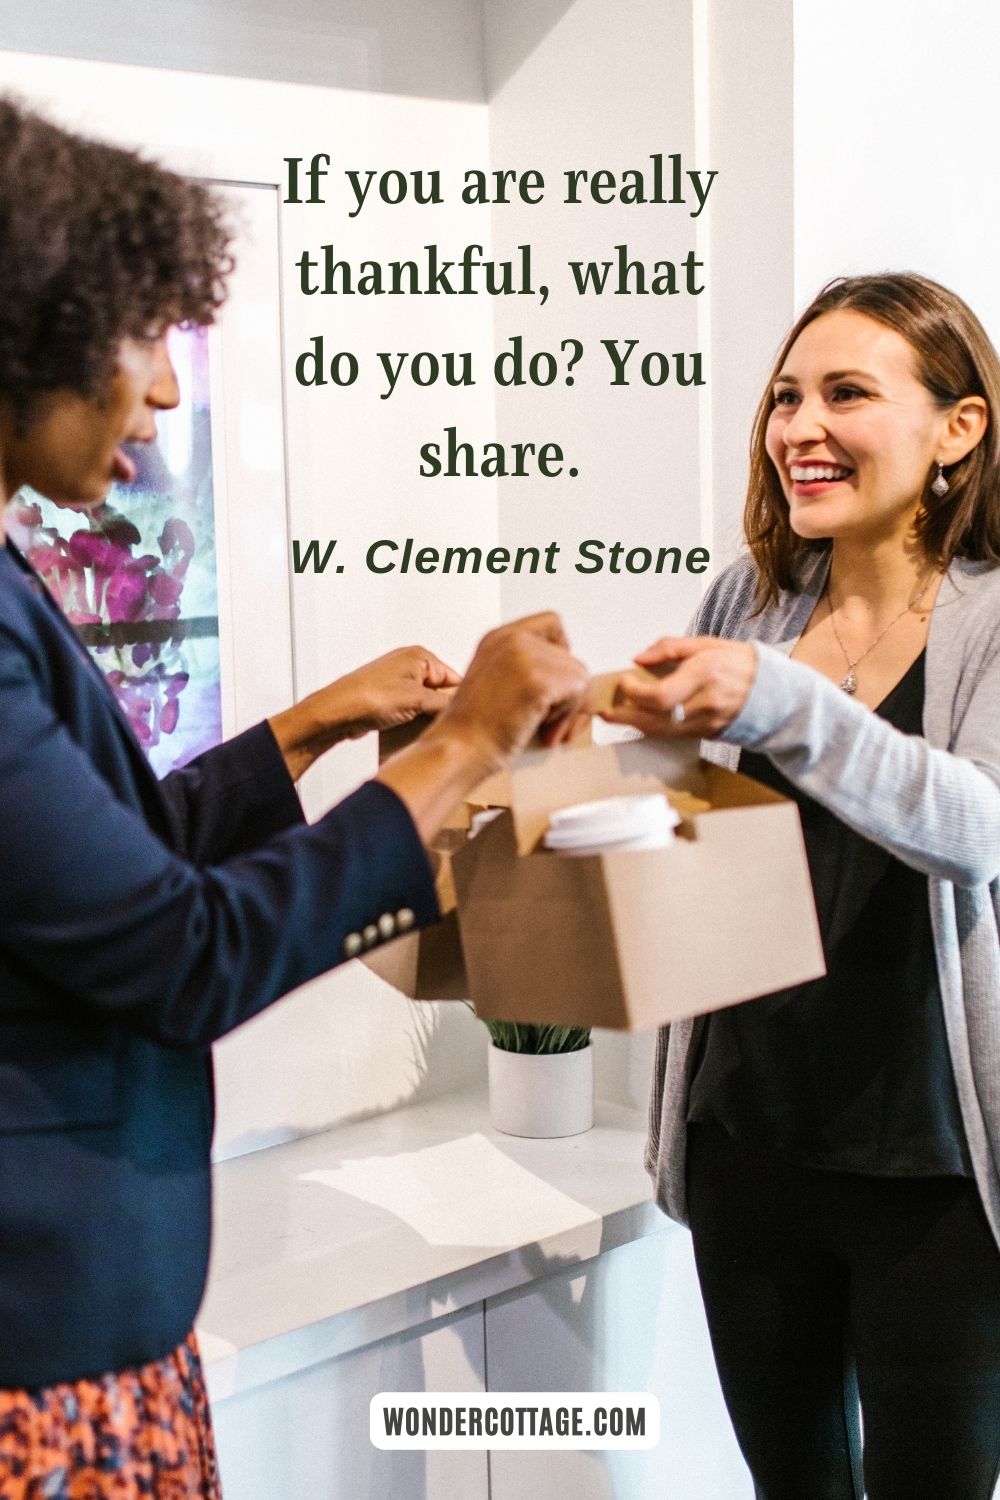 If you are really thankful, what do you do? You share. W. Clement Stone